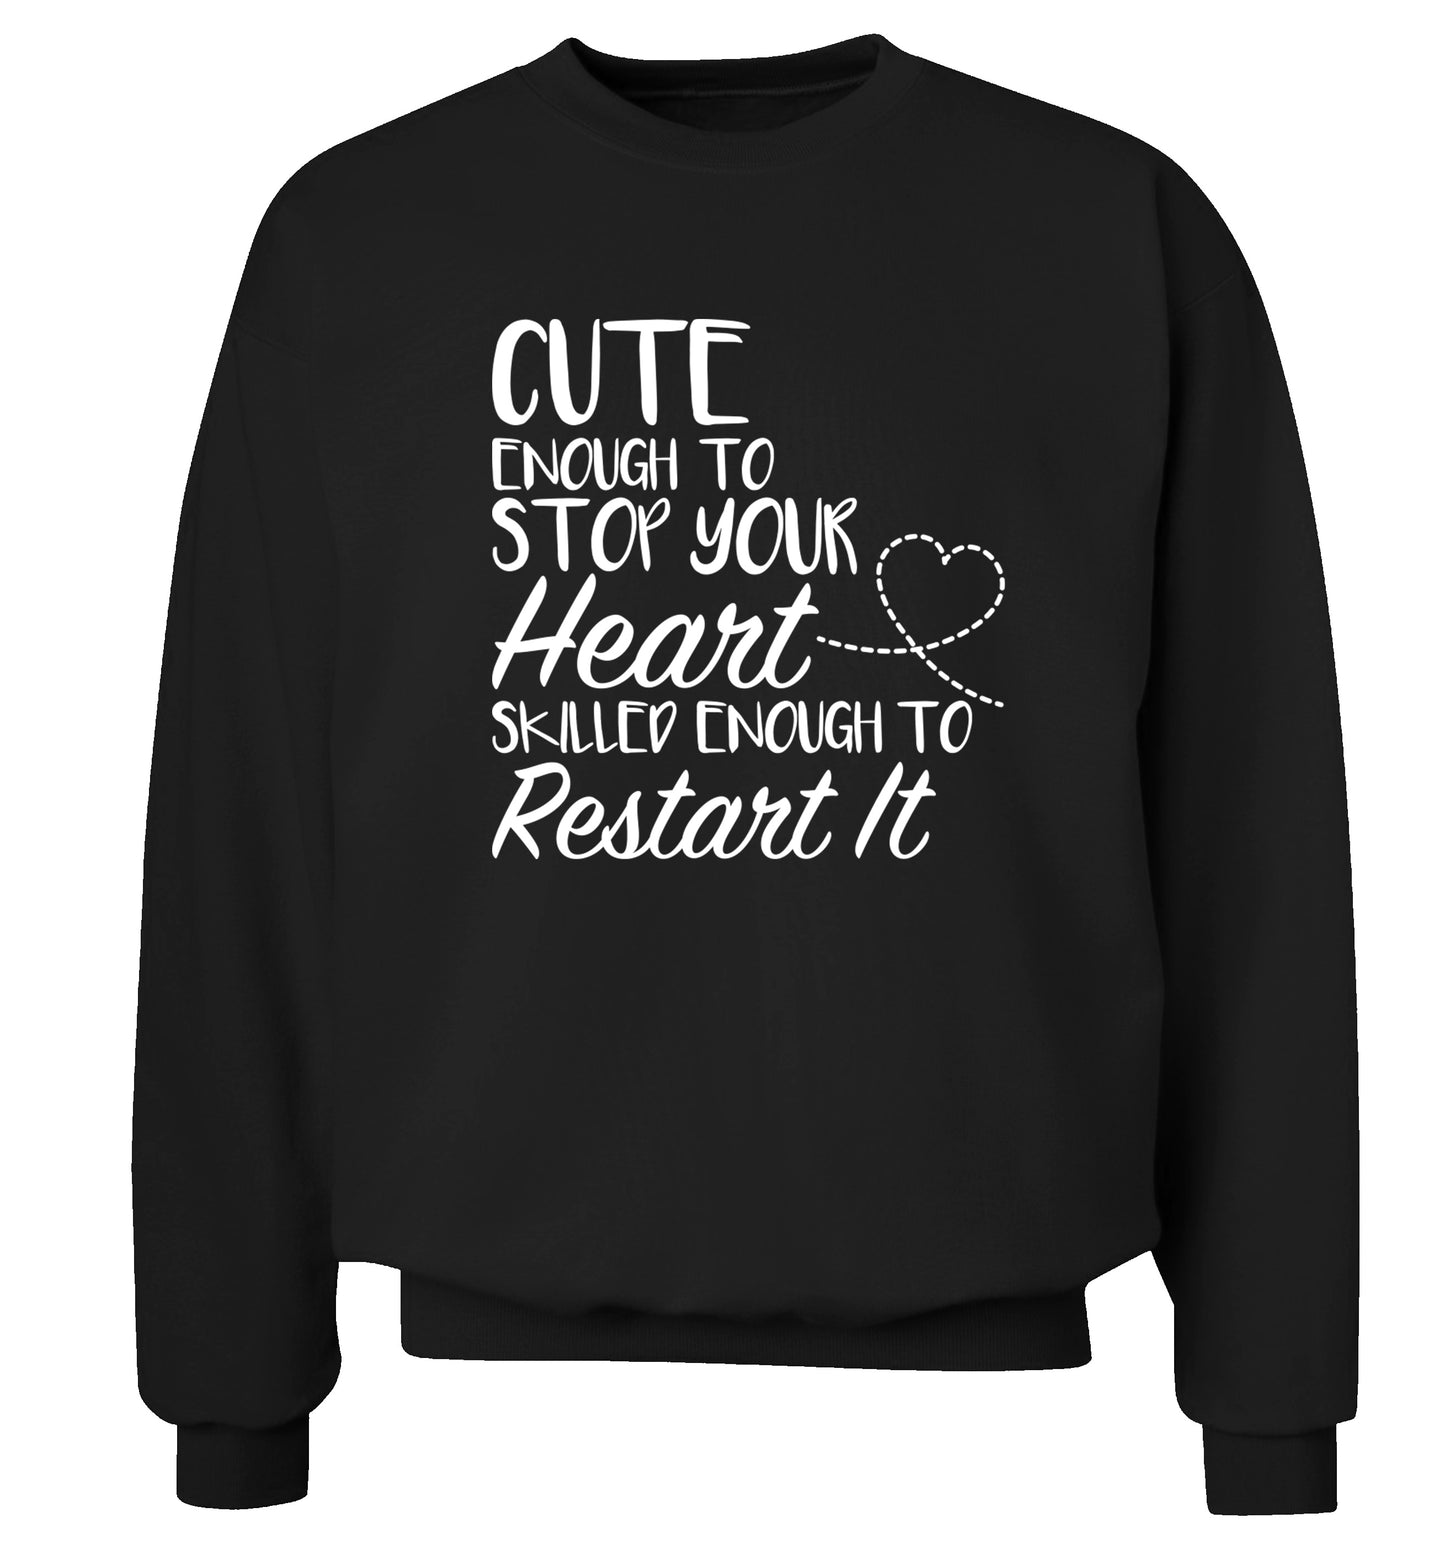 Cute enough to stop your heart skilled enough to restart it Adult's unisex black Sweater 2XL